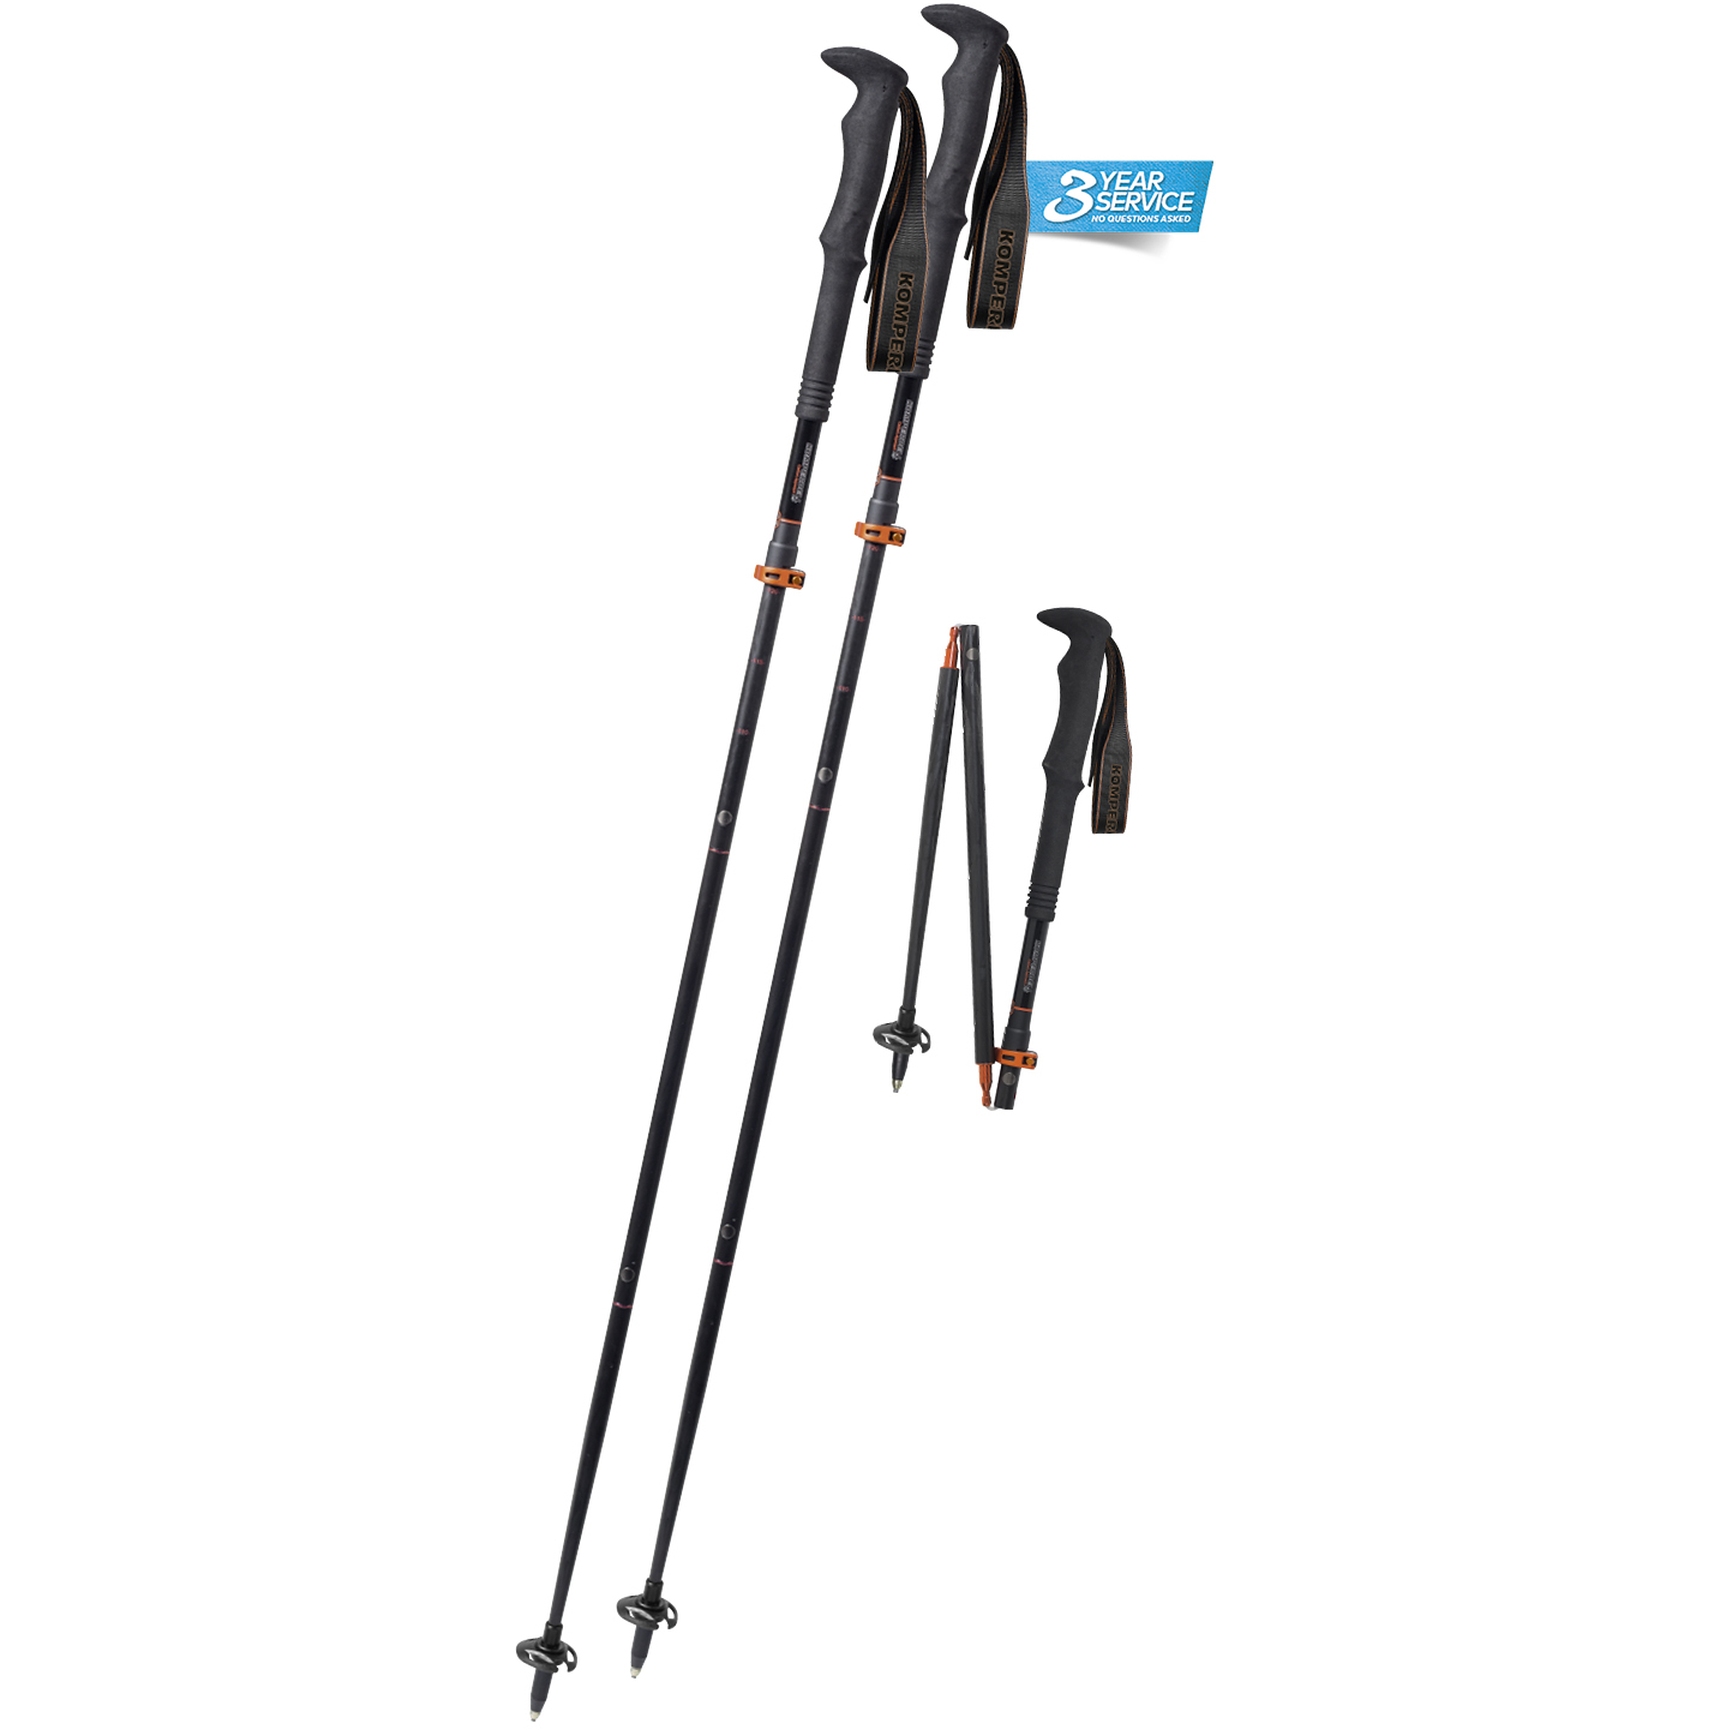 Picture of Komperdell Carbon FXP.4 Approach Vario Compact Trekking Poles (Pair) - black/red